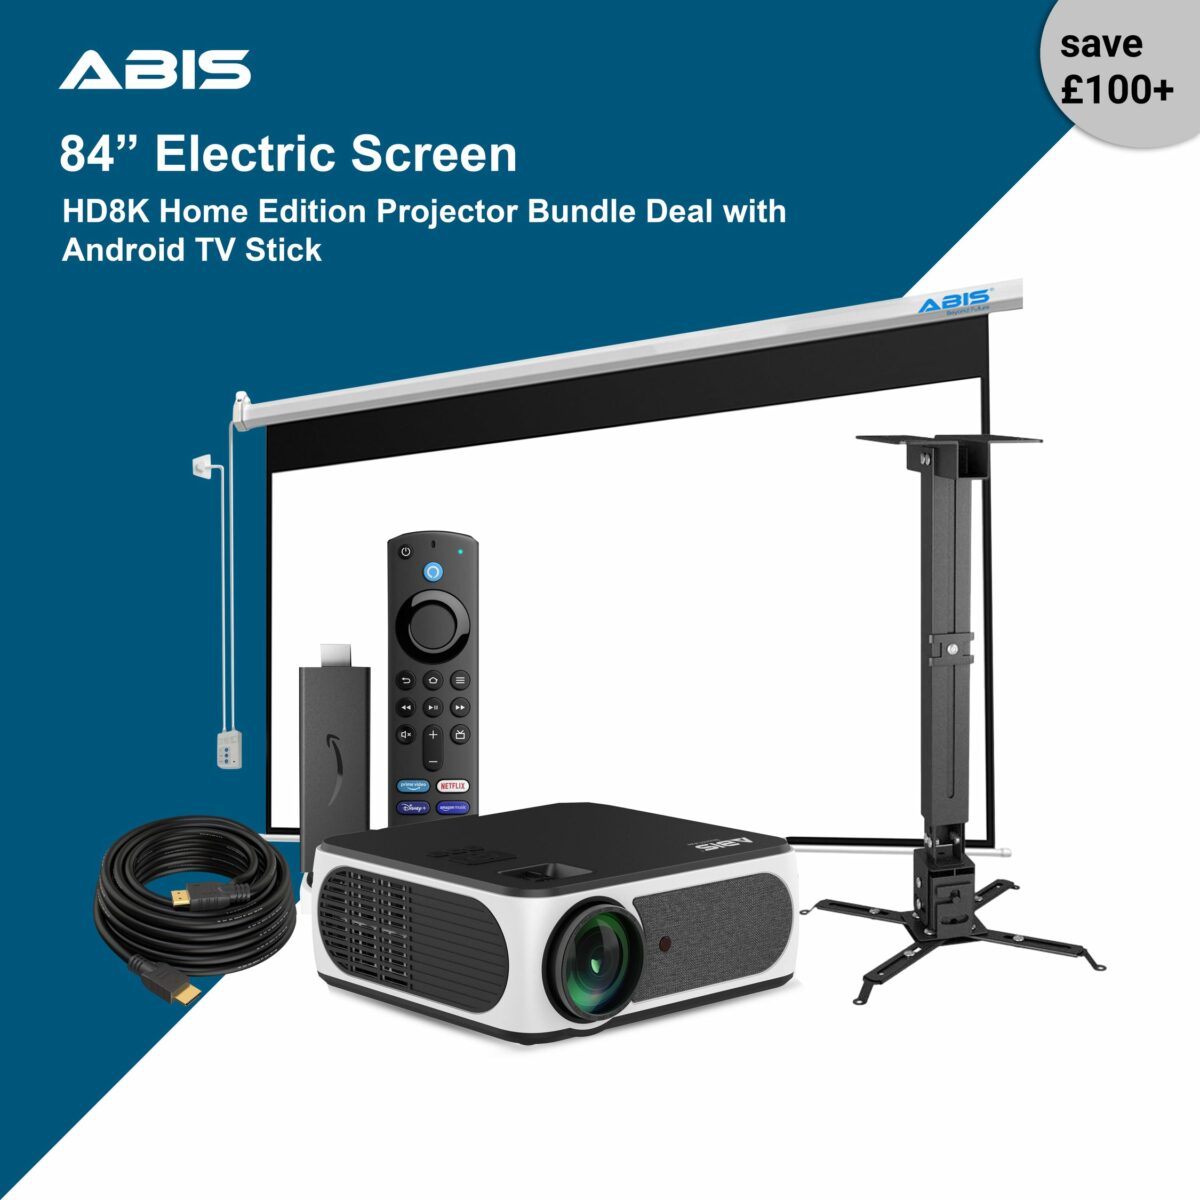 84" Electric Projector Screen & Projector Bundle with Android TV Stick for Home - Complete Set - ABIS